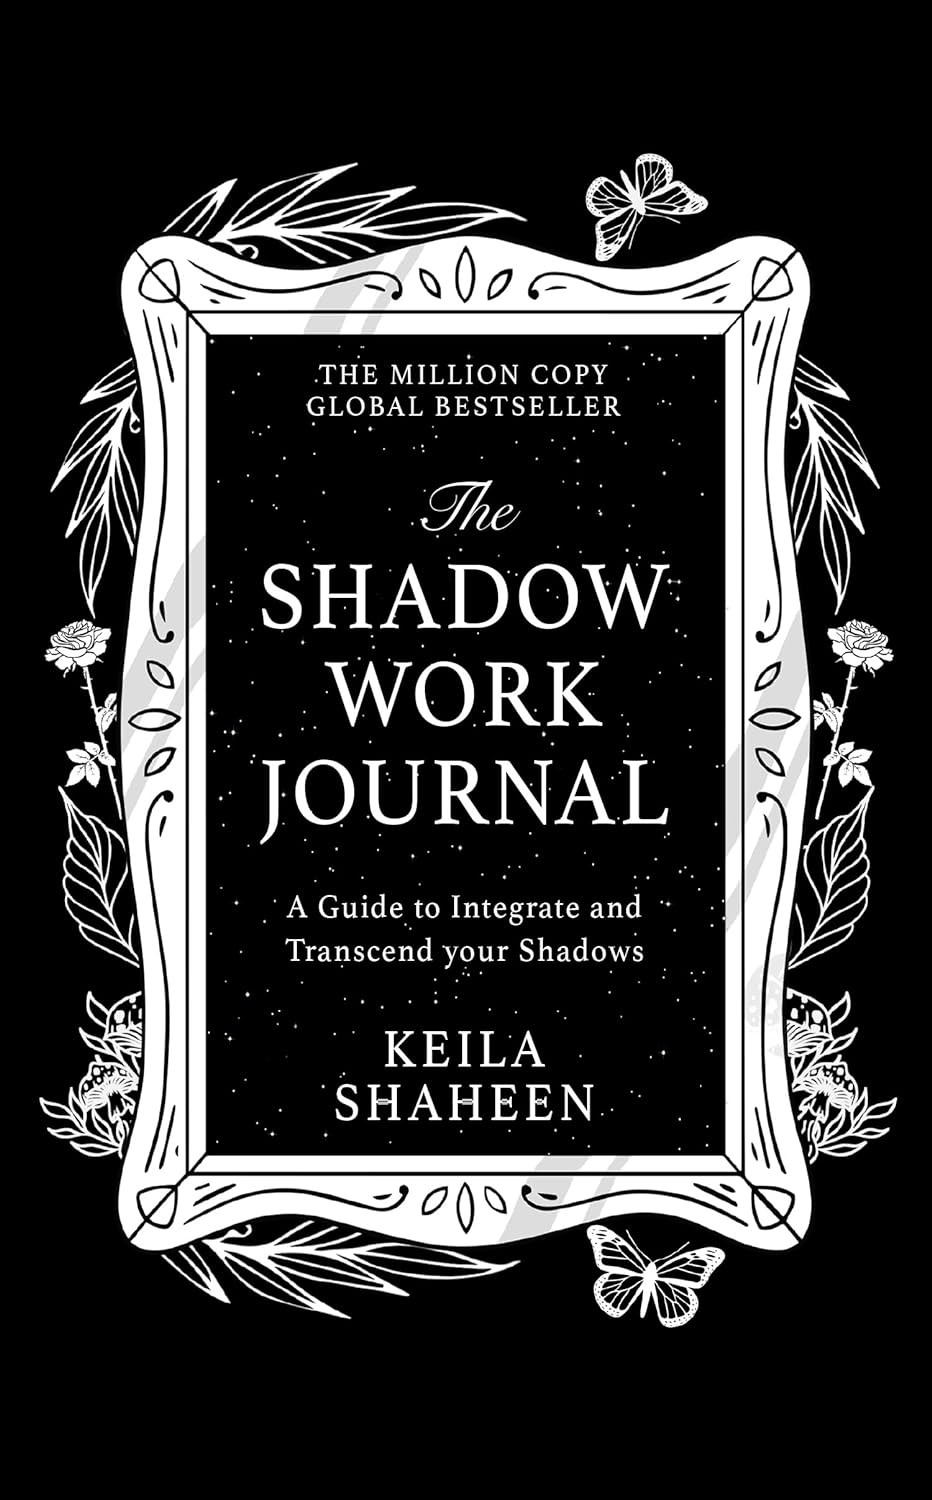 The Shadow Work Journal (Paperback)